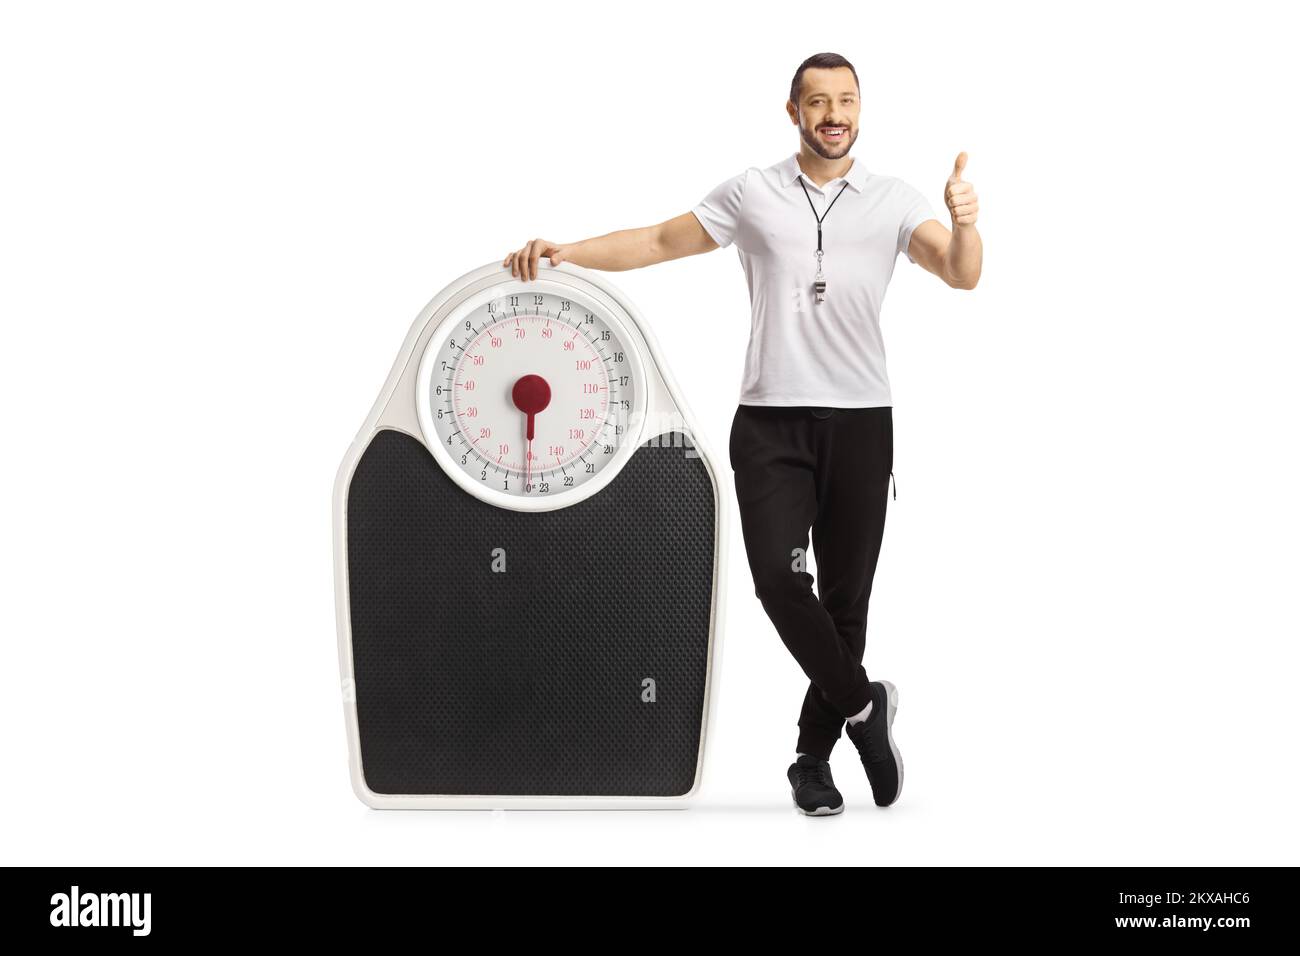 Fitness coach standing next to a weigh scale and showing thumbs up isolated on white background Stock Photo